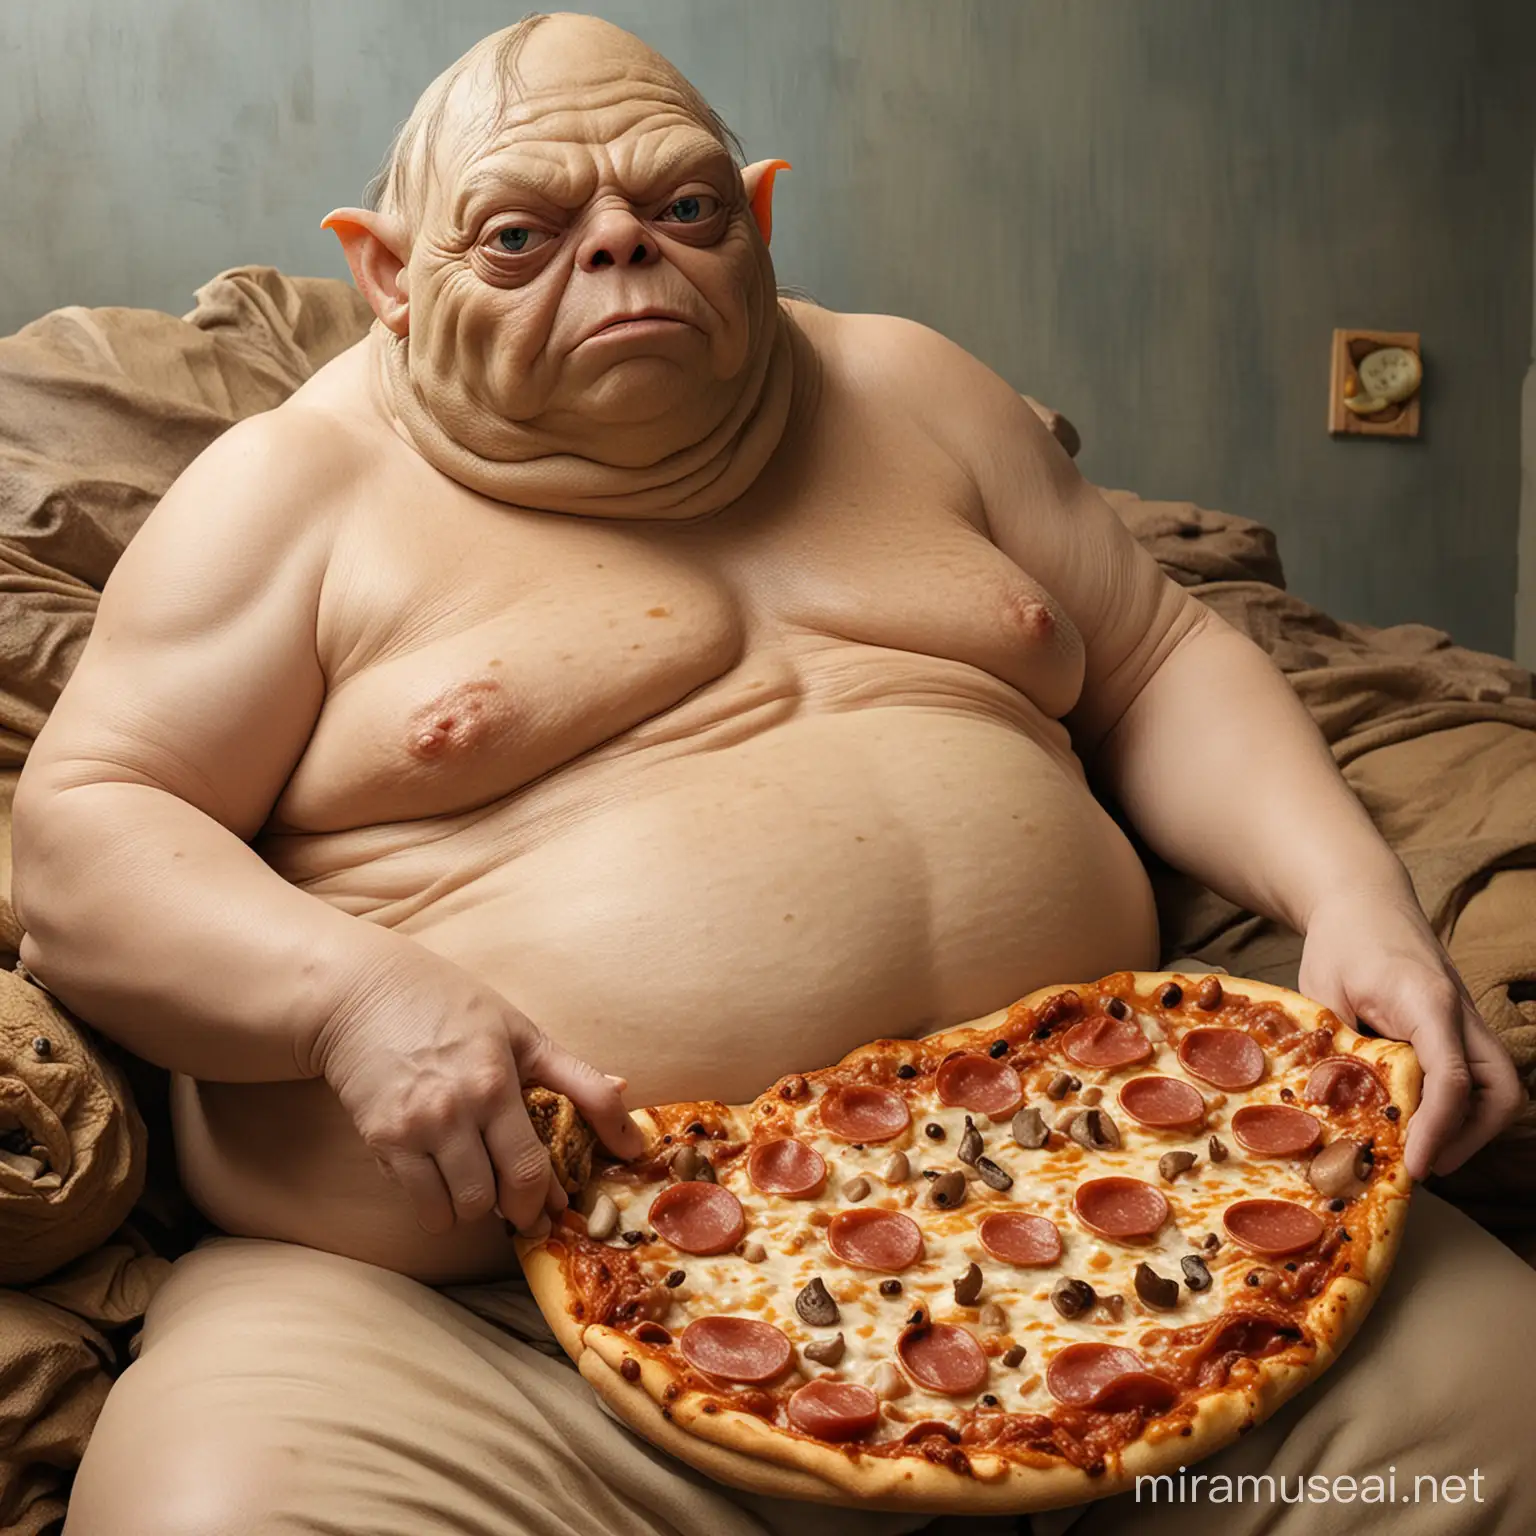 Gollum played as jabba the hutt with pizza on his belly